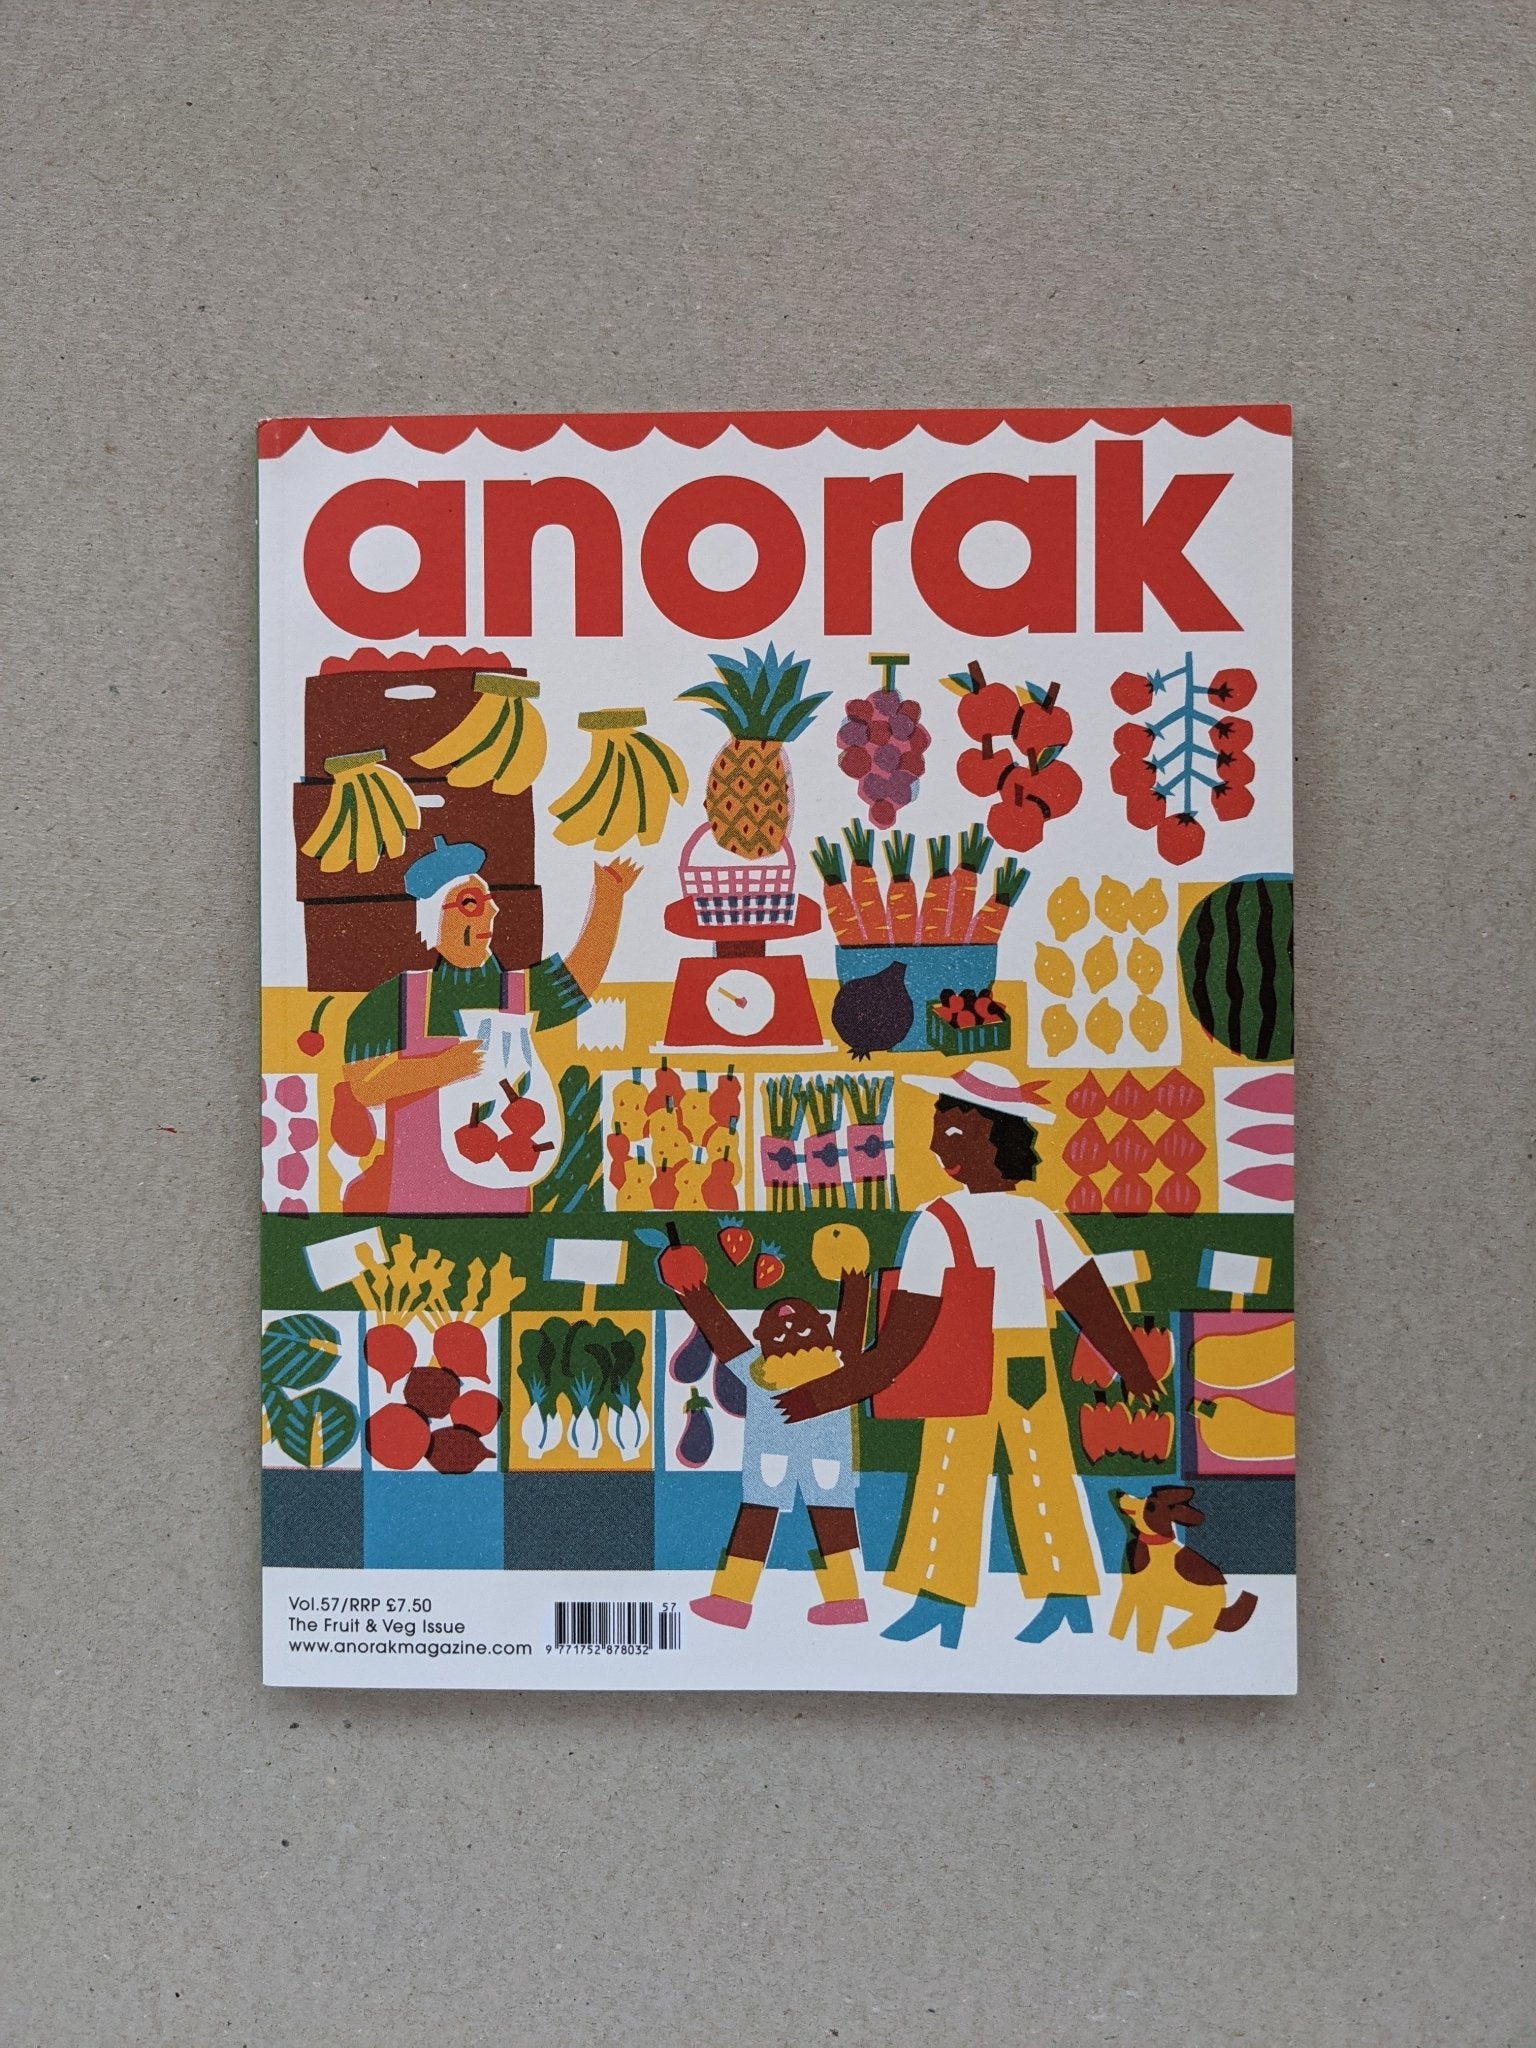 Anorak - Vol 57 - The Stationery Cupboard